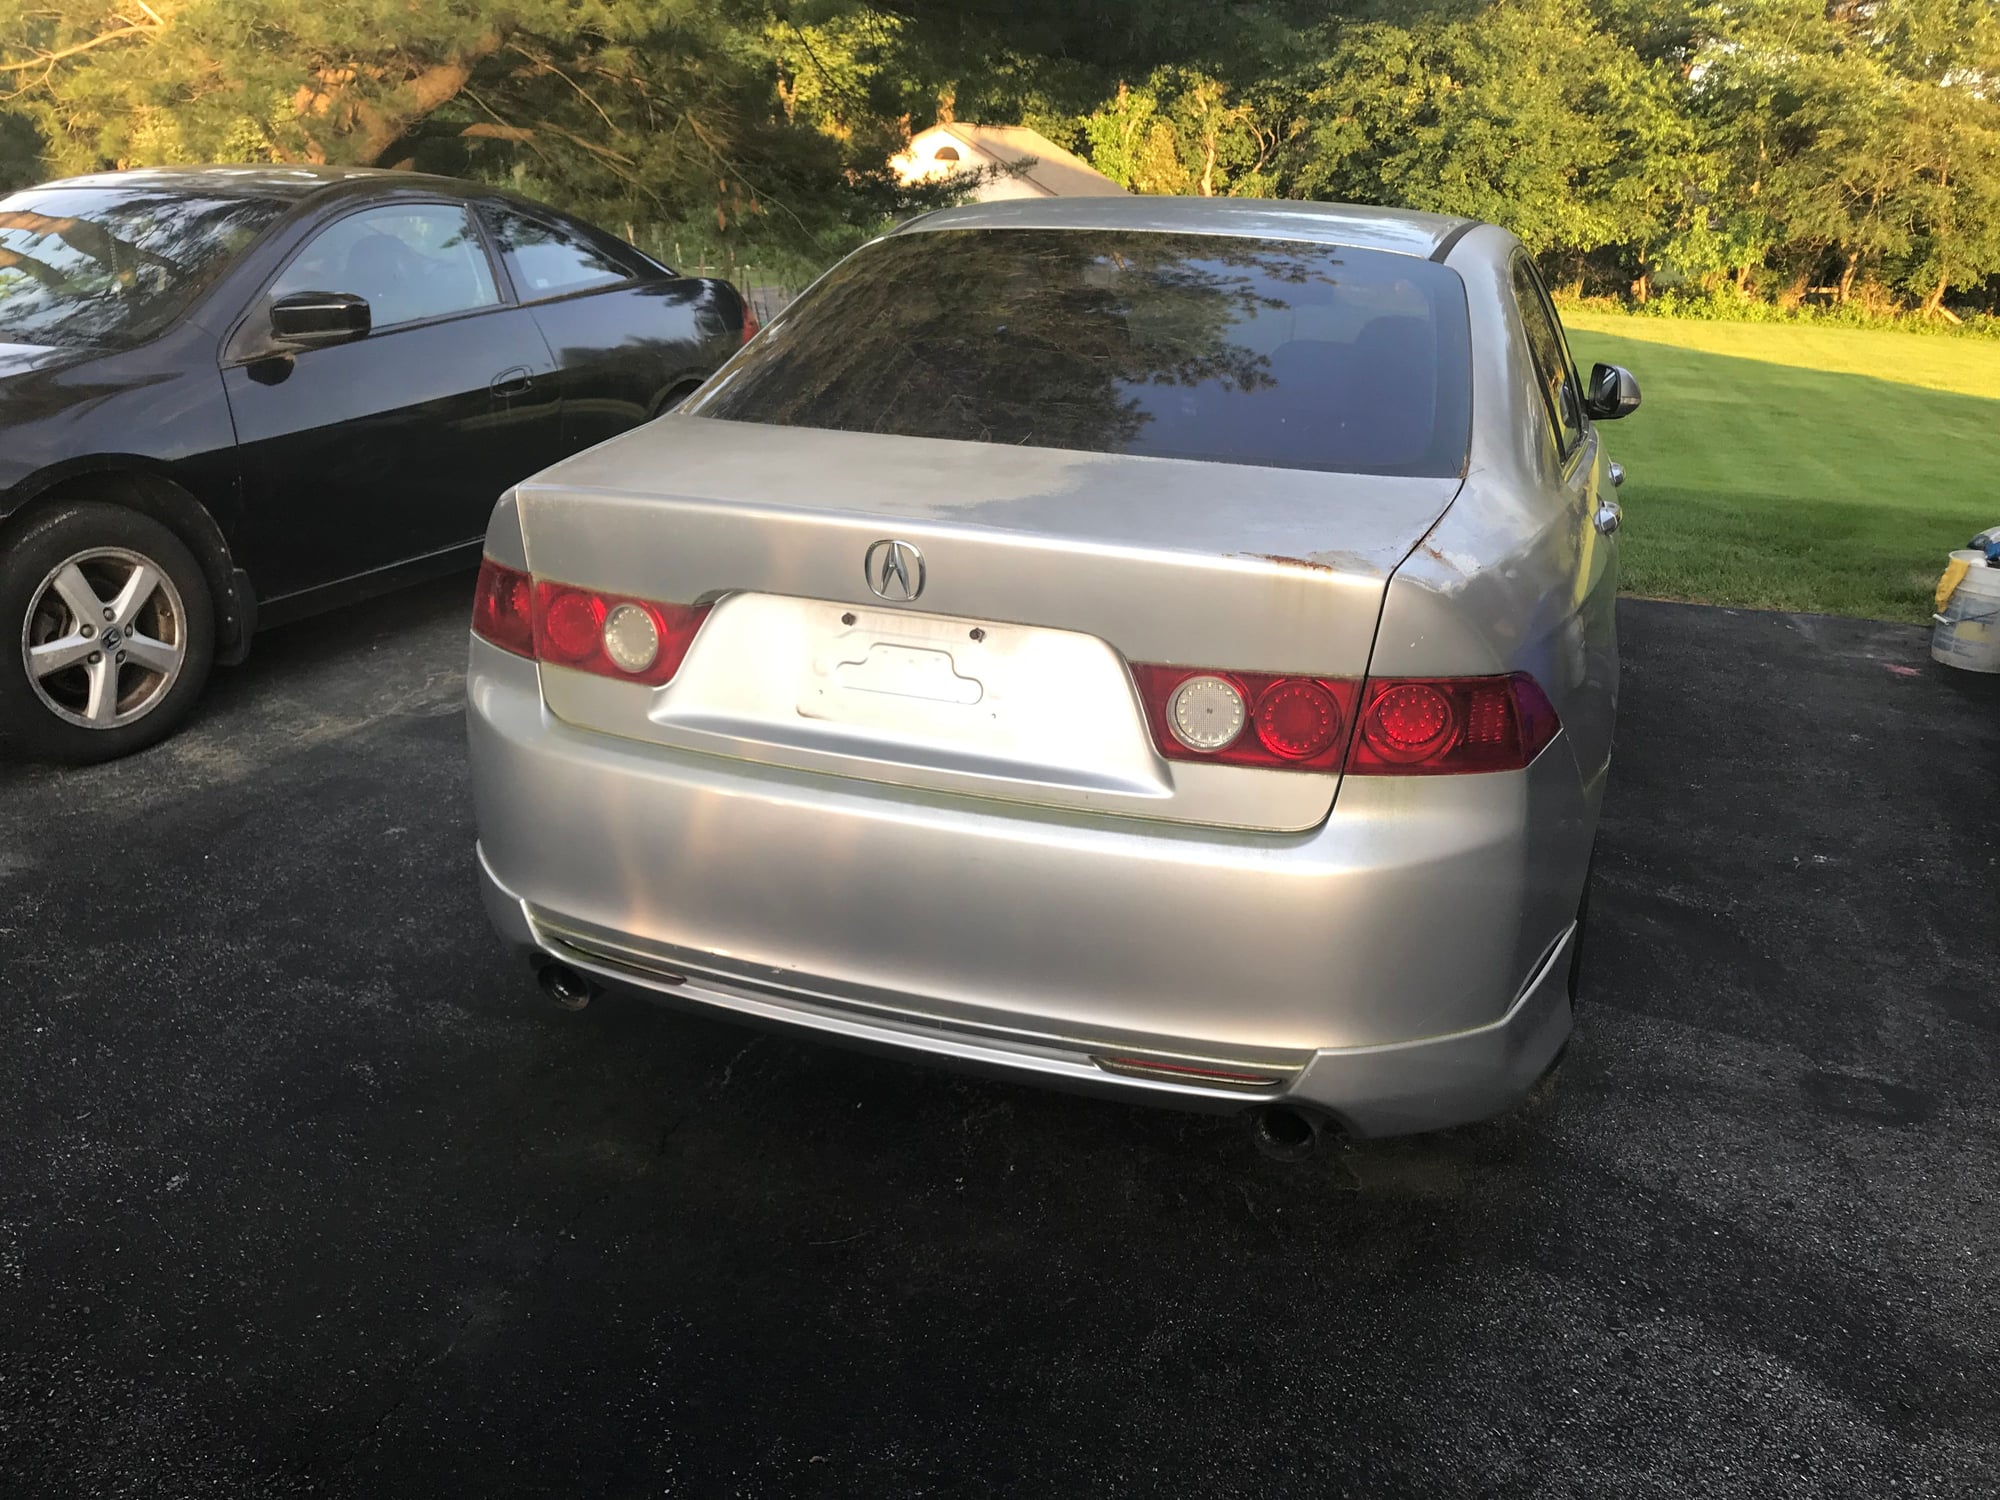 2004 Acura TSX - SOLD: 2004 Acura TSX Comptech Supercharged - Used - VIN JH4CL969X4C024856 - 242,000 Miles - 4 cyl - 2WD - Automatic - Sedan - Silver - Silver Spring, MD 20905, United States